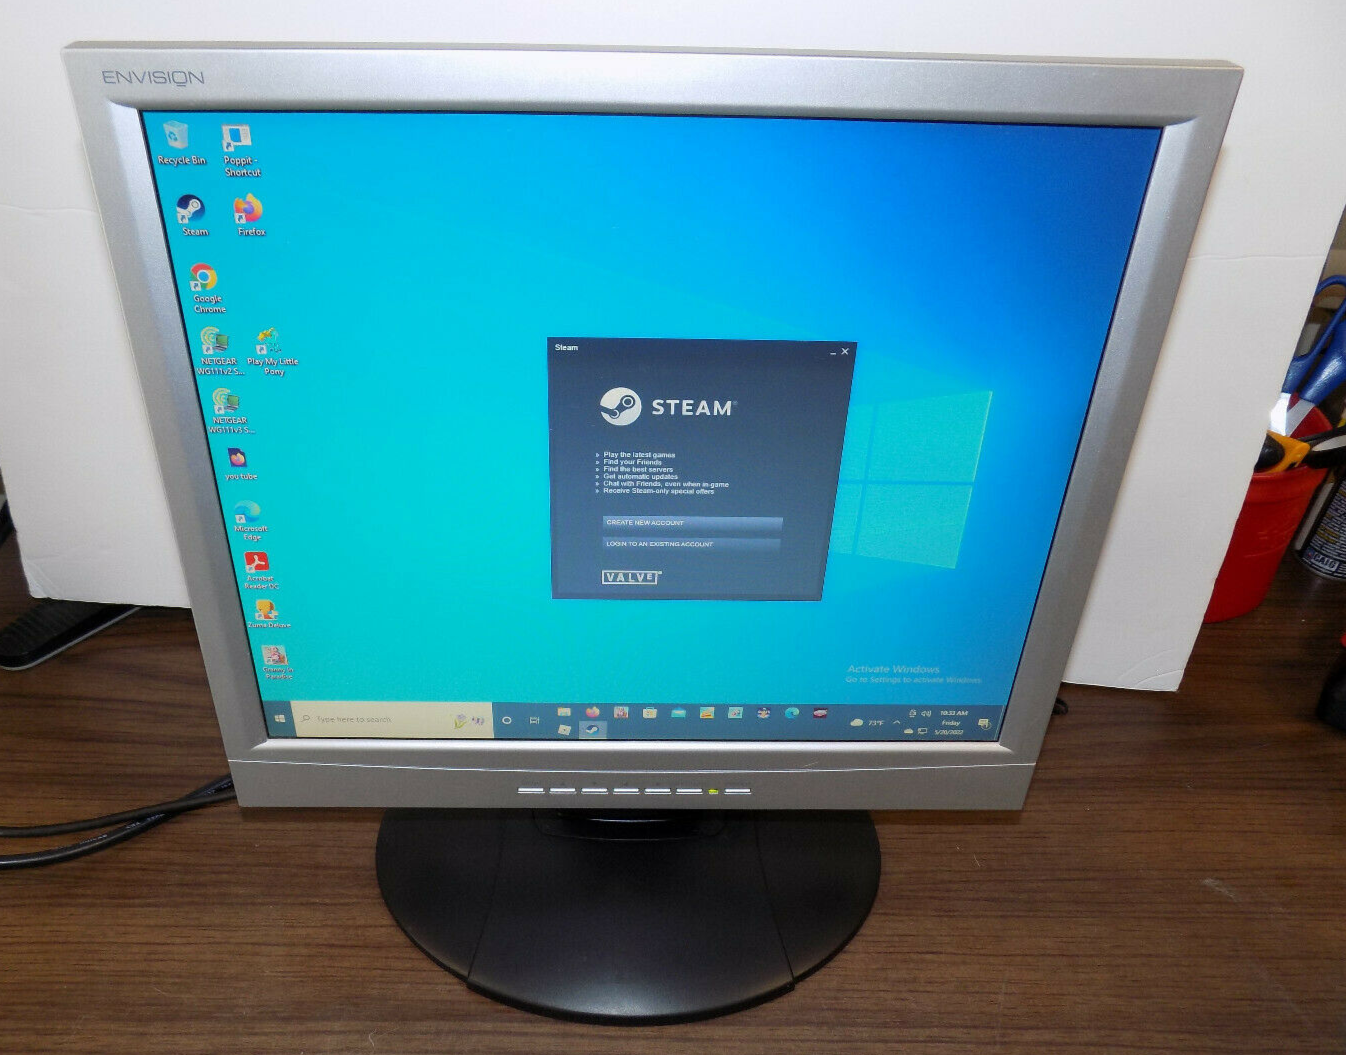 Envision EN-7410 17 Inch Computer Monitor With VGA and Power C...